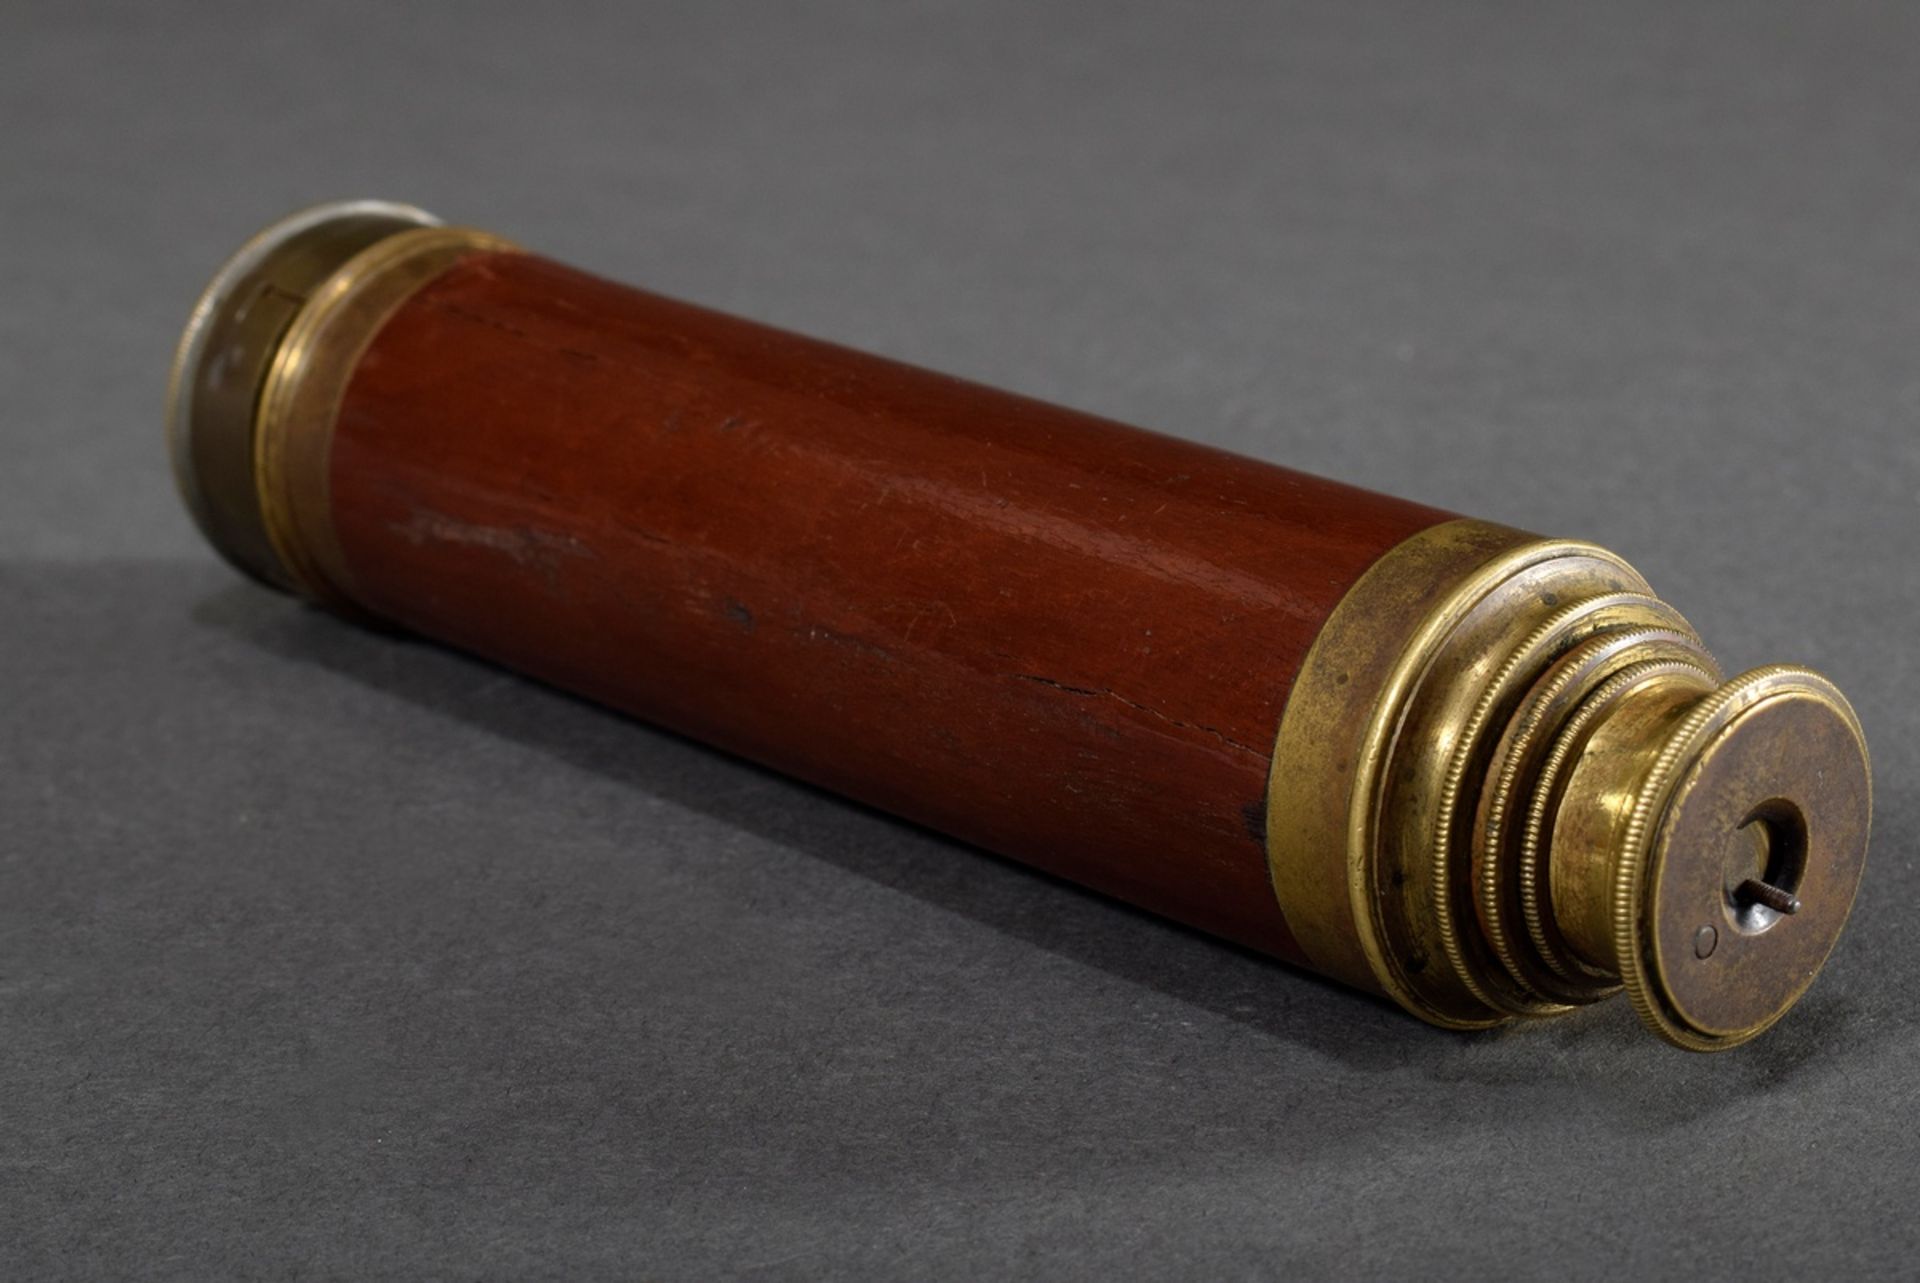 Telescope with wood covered brass housing, l. 15,5-36,5cm, slightly defective